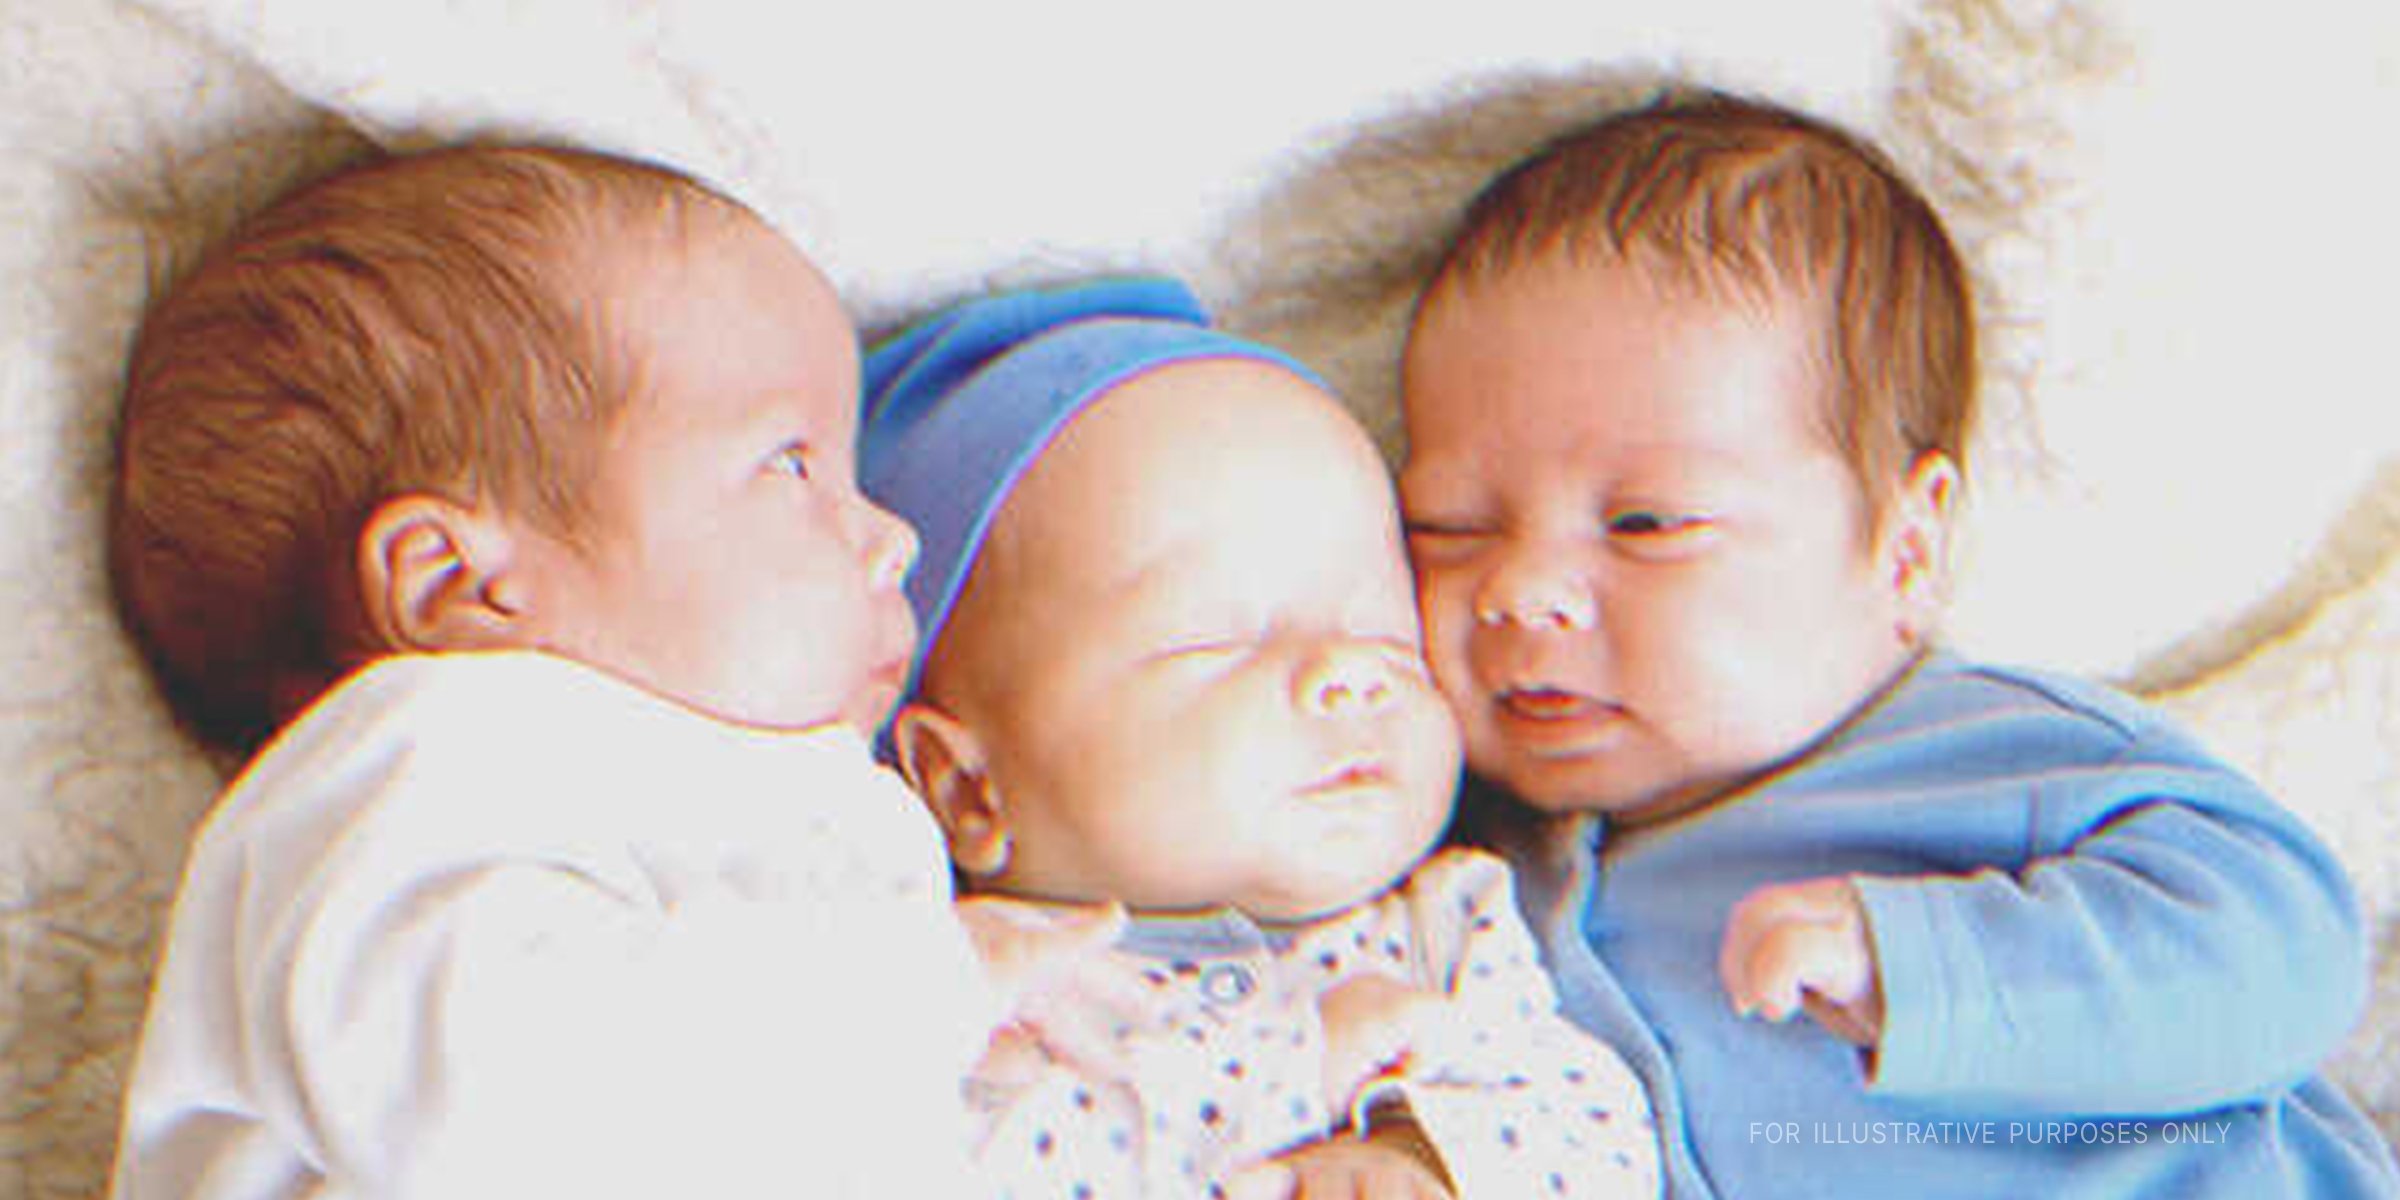 Three newborn babies cuddling with each other | Source: Getty Images